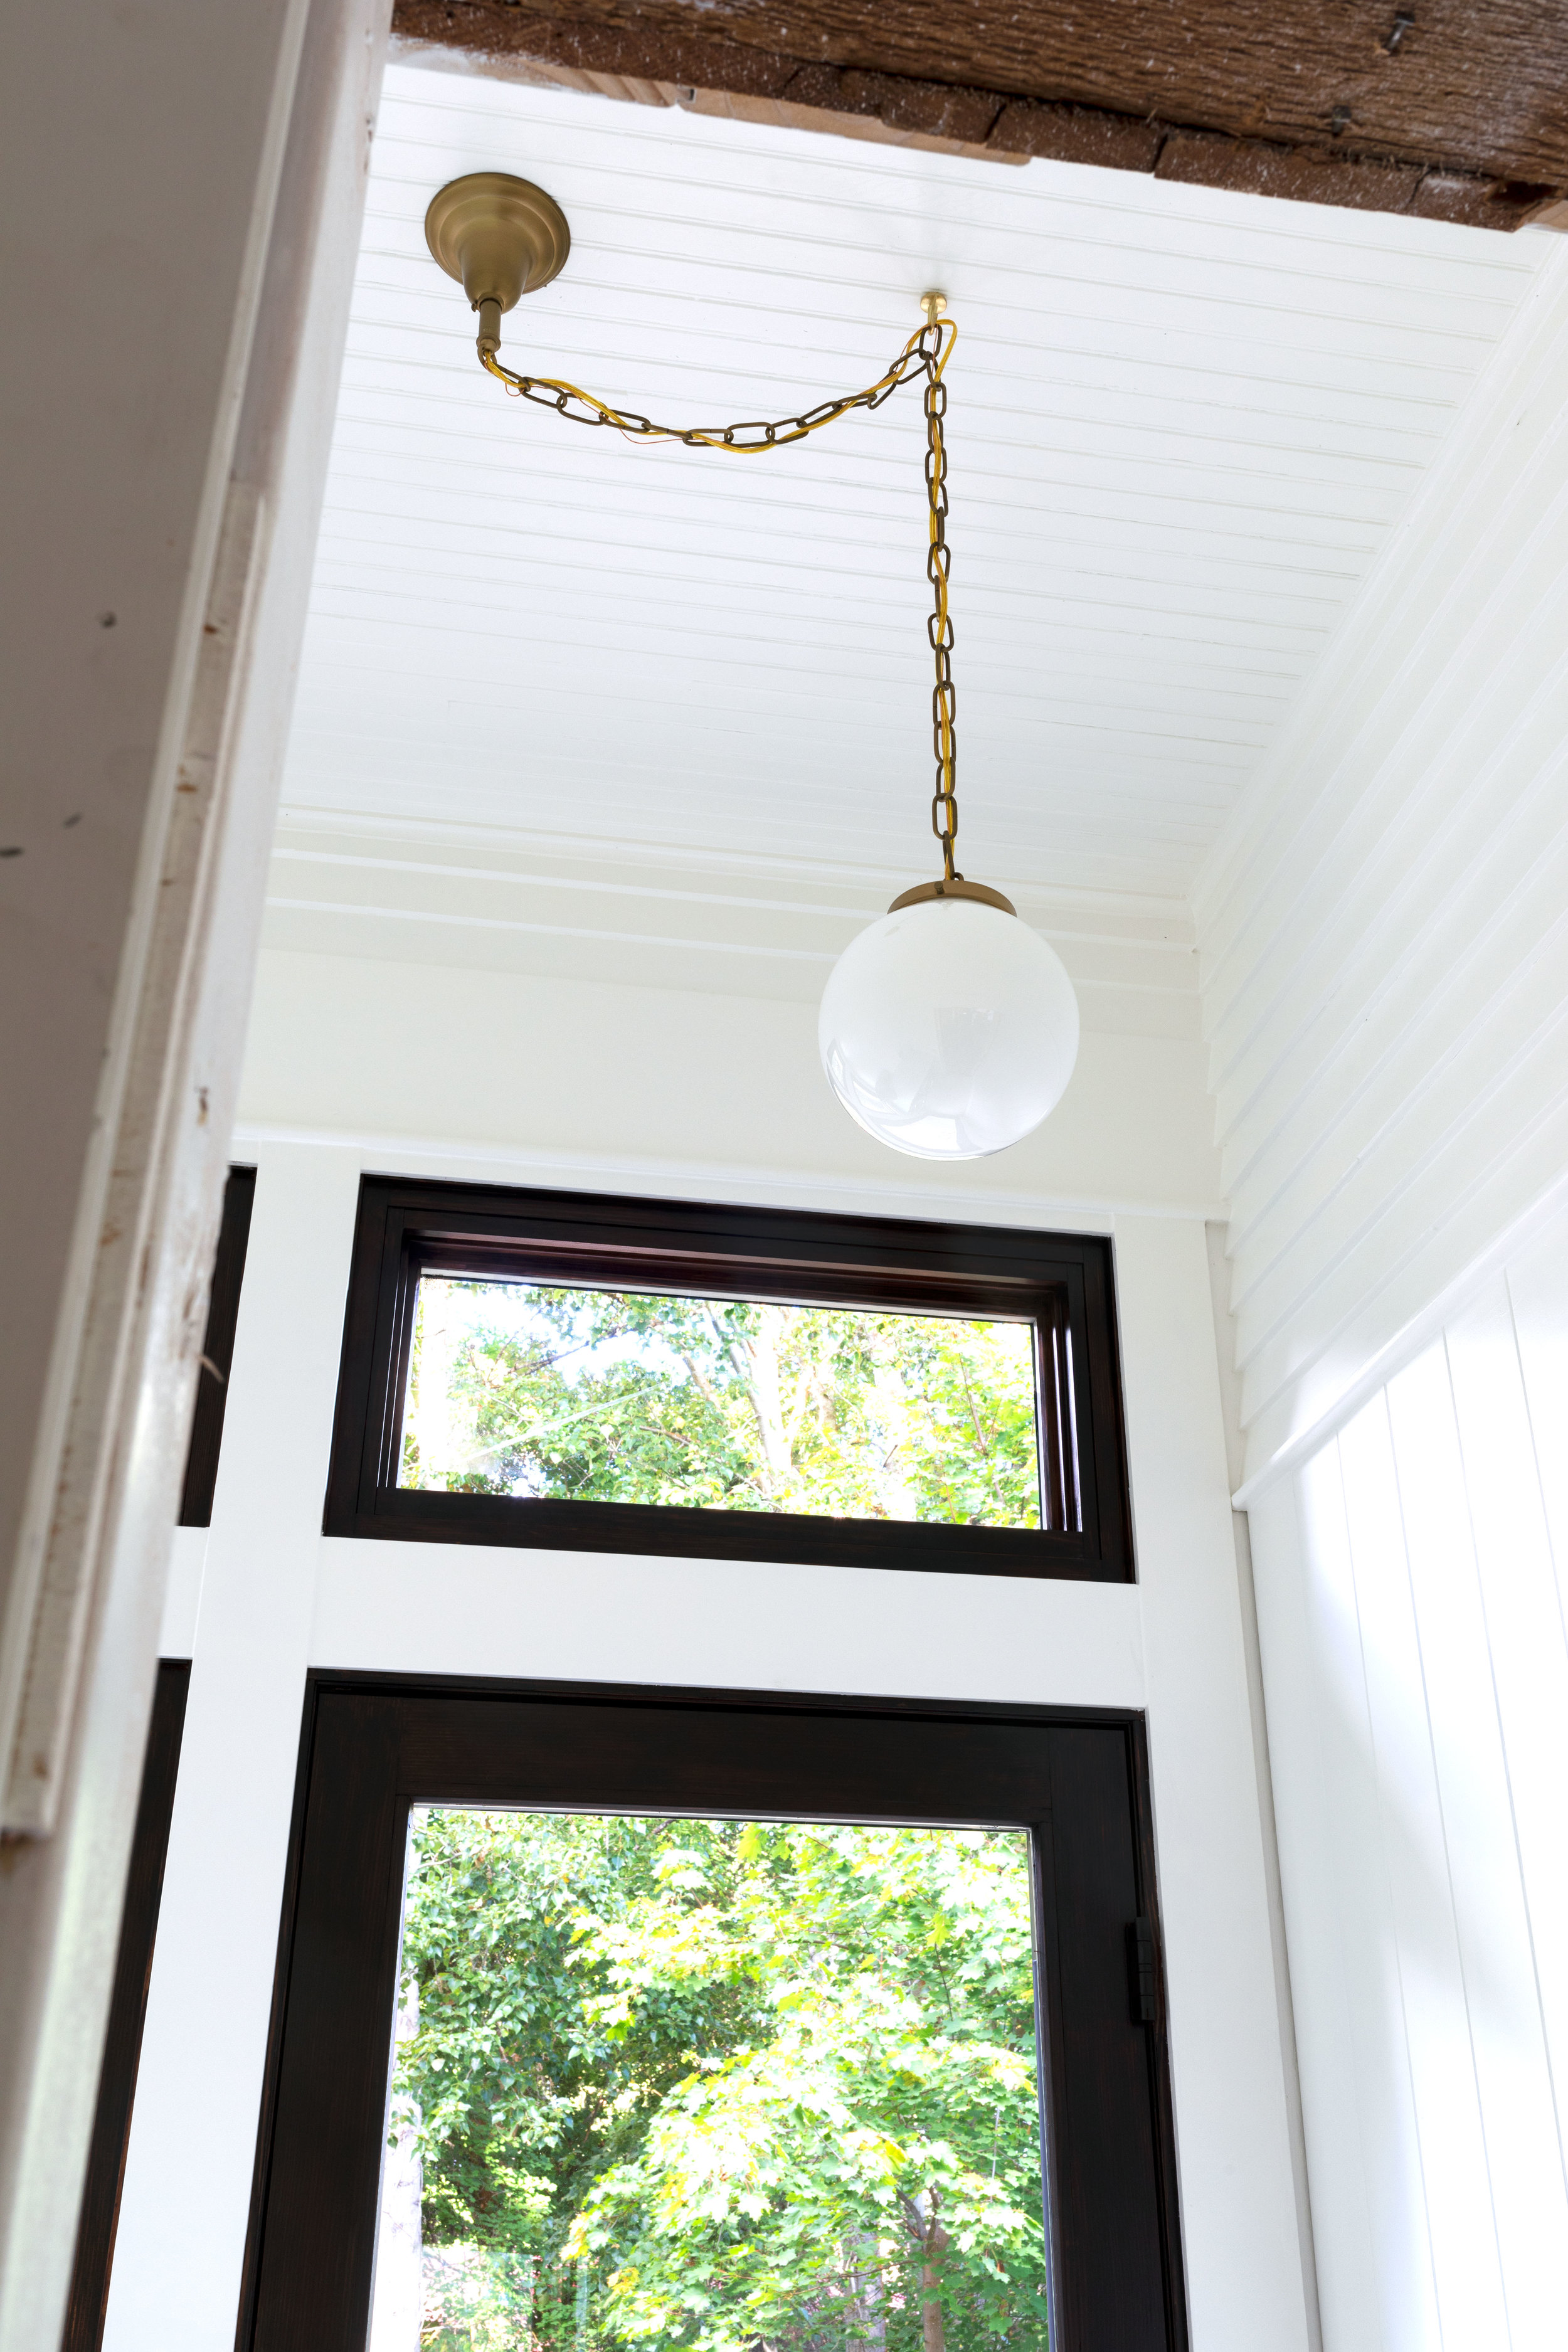 How to Off-Center Ceiling Light (Without Junction Box) — The Grit and Polish